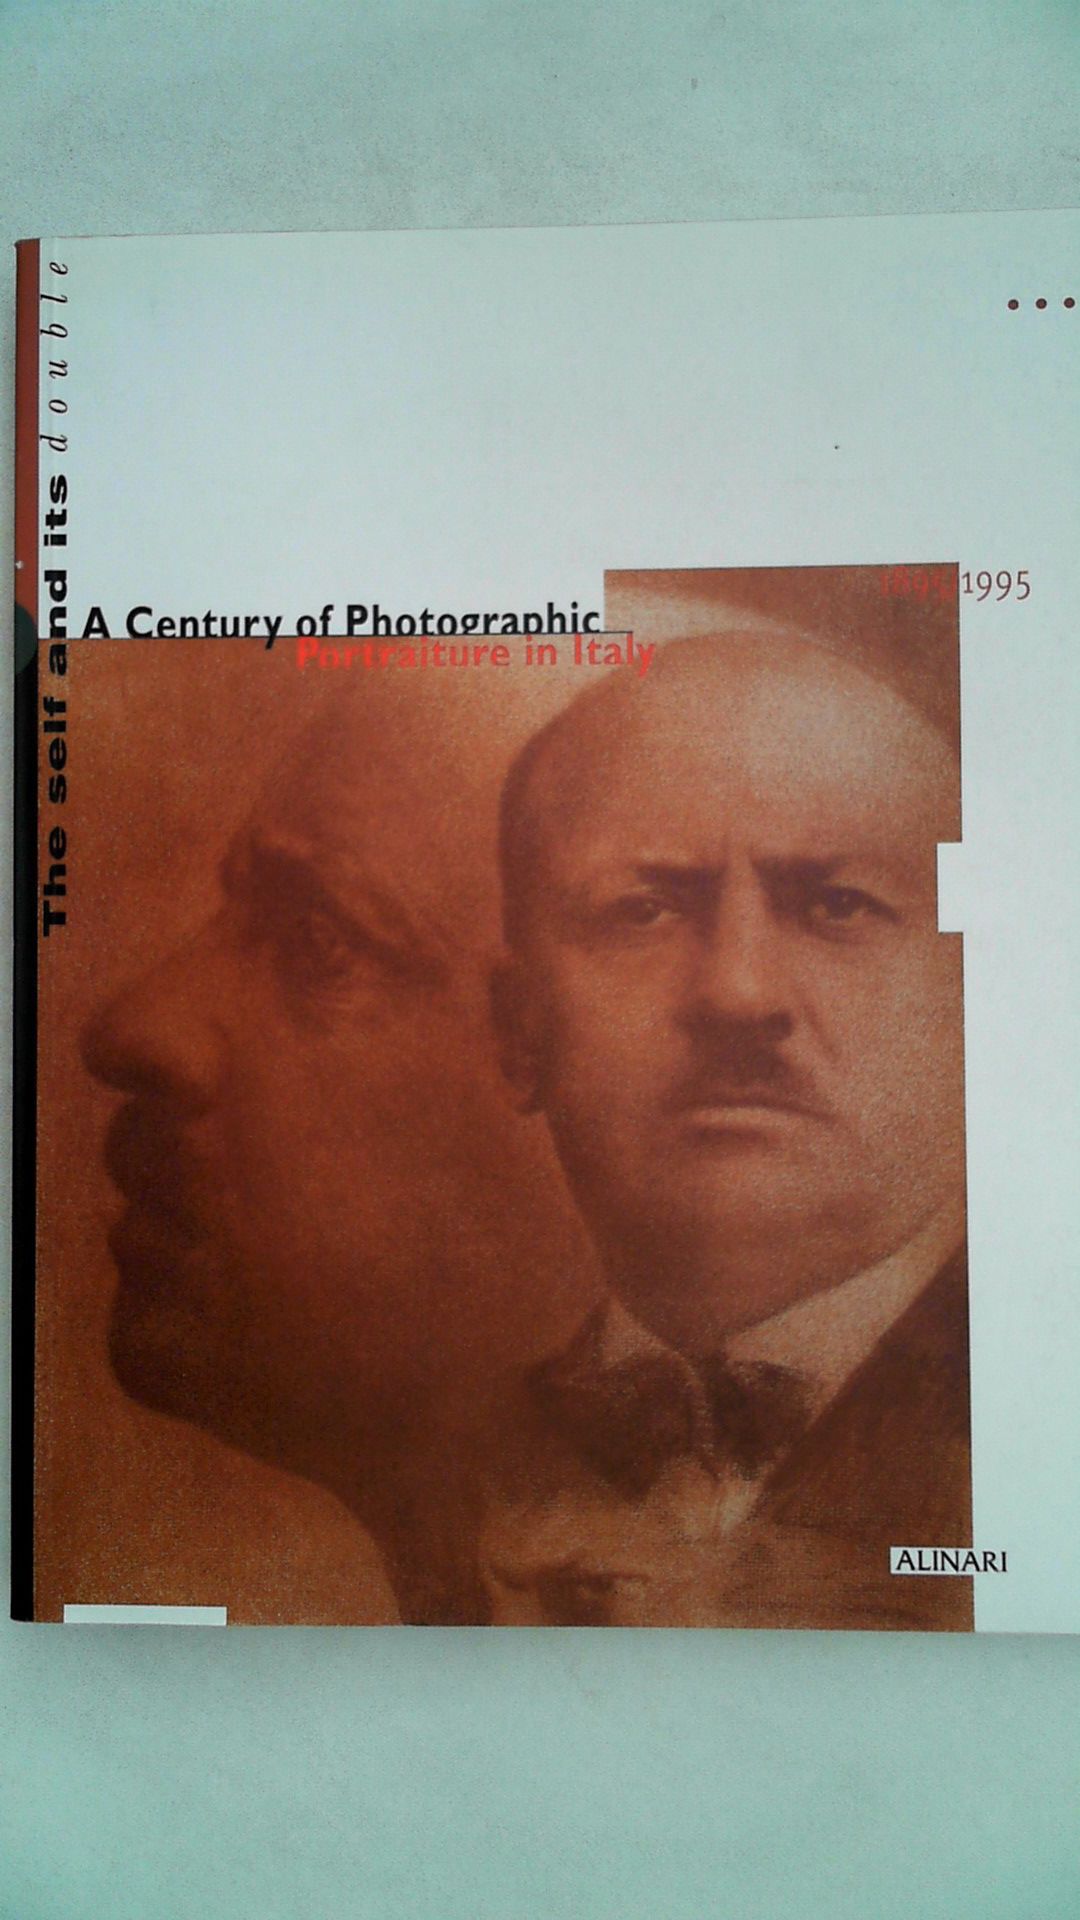 The self and its double - A Century of Photographic Portraiture in Italy 1895/1995, - Zannier, Italo